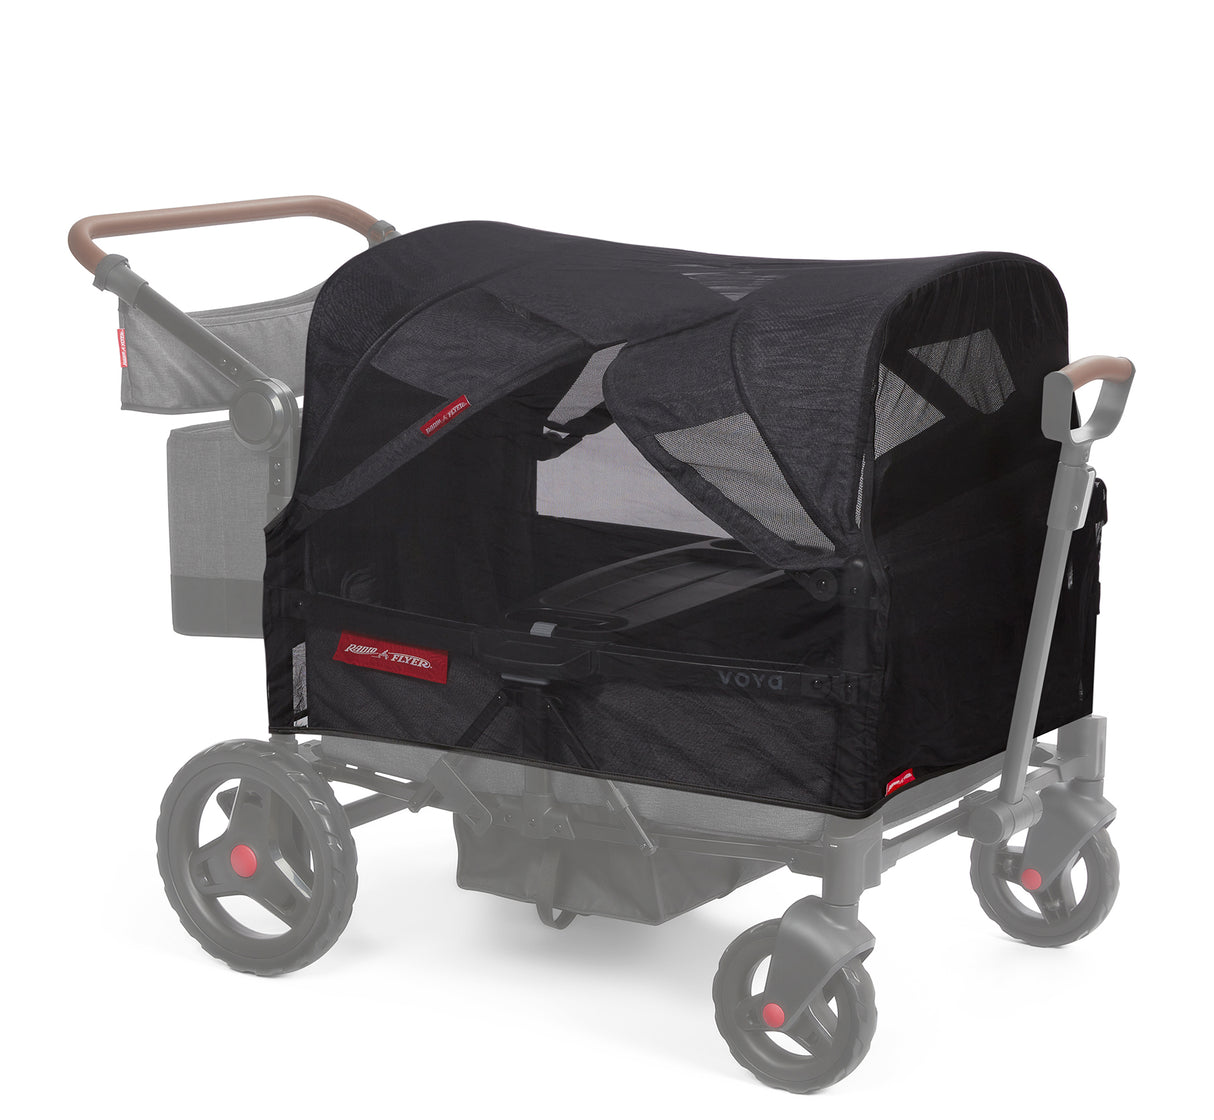 Mosquito Mesh with Bag - Voya™ Quad Stroller Wagon